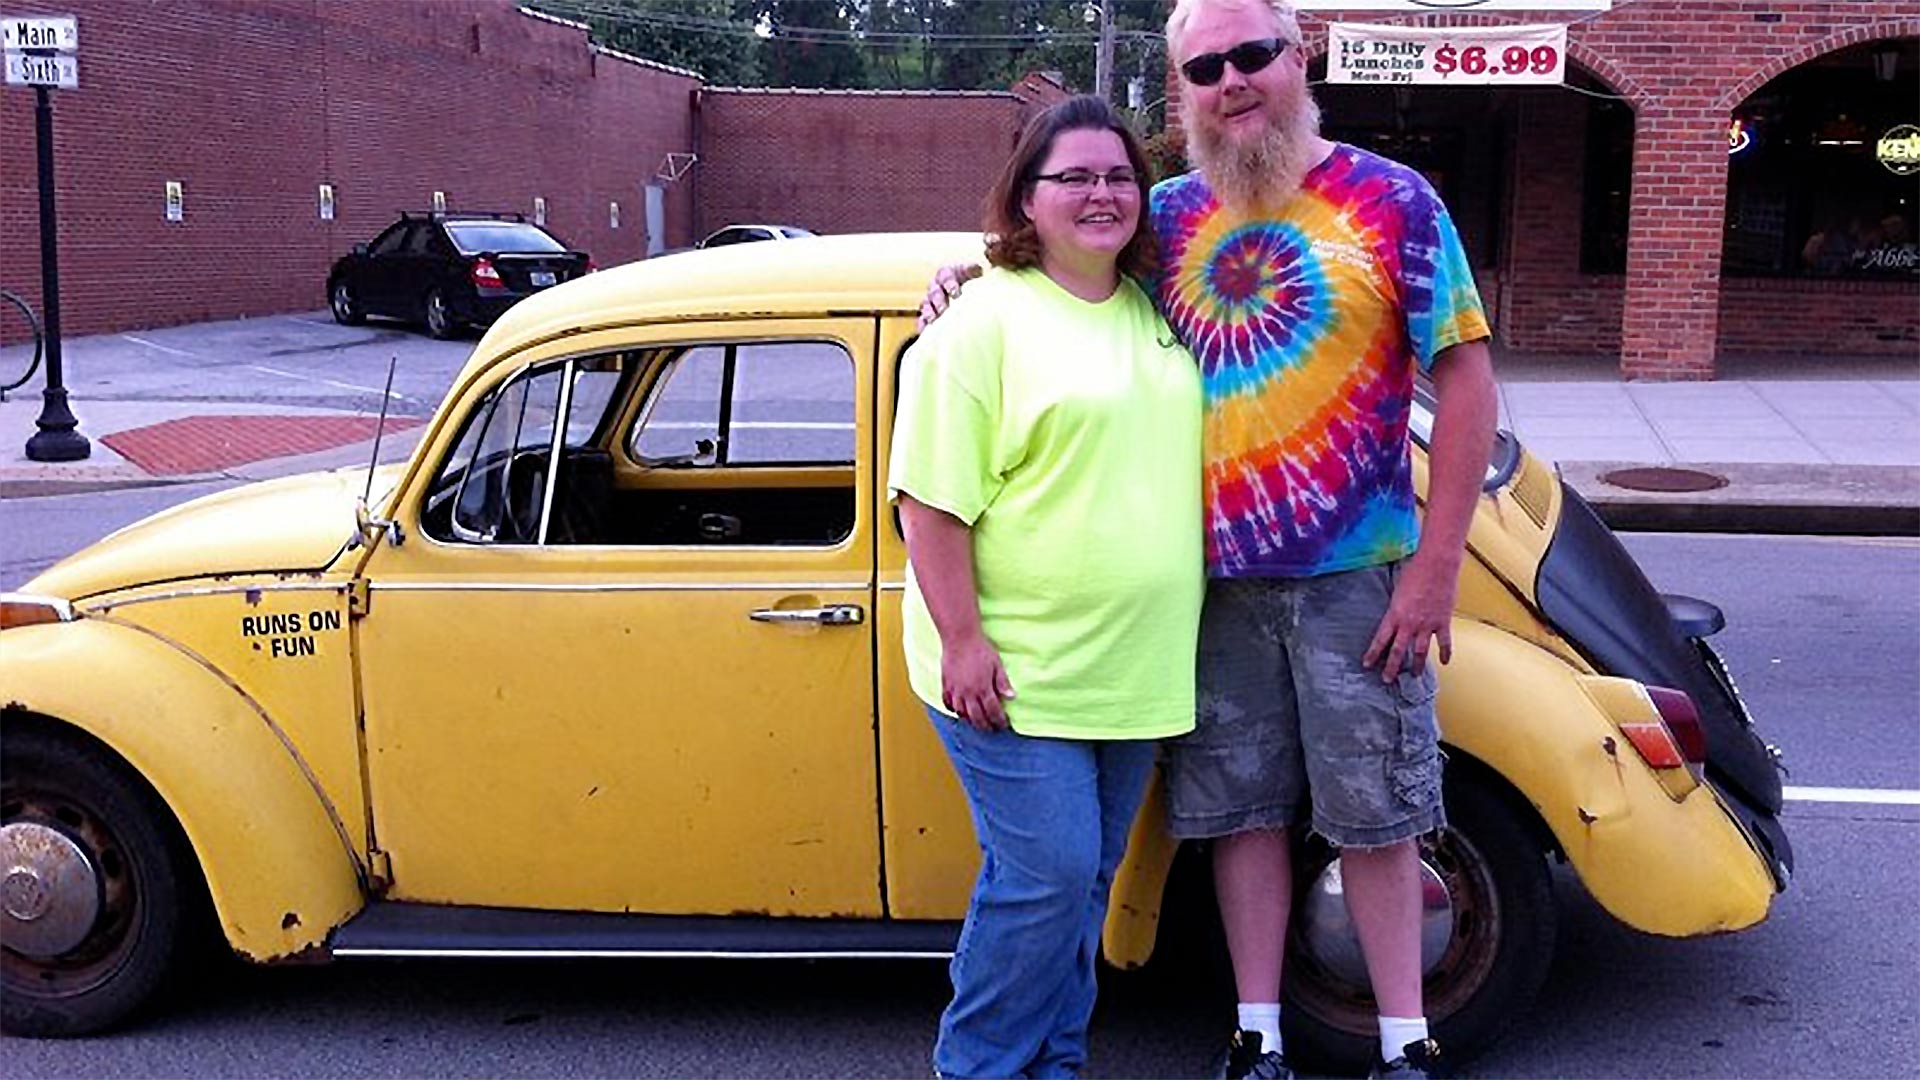 Jessica Bray and her husband, Anthony Bray, pose with their 1970 Volkswagen Beetle. Anthony converted his Beetle to an electric car. "As a special touch, we added bubble machines to the back to blow bubbles at car shows and as we drive," Jessica said.